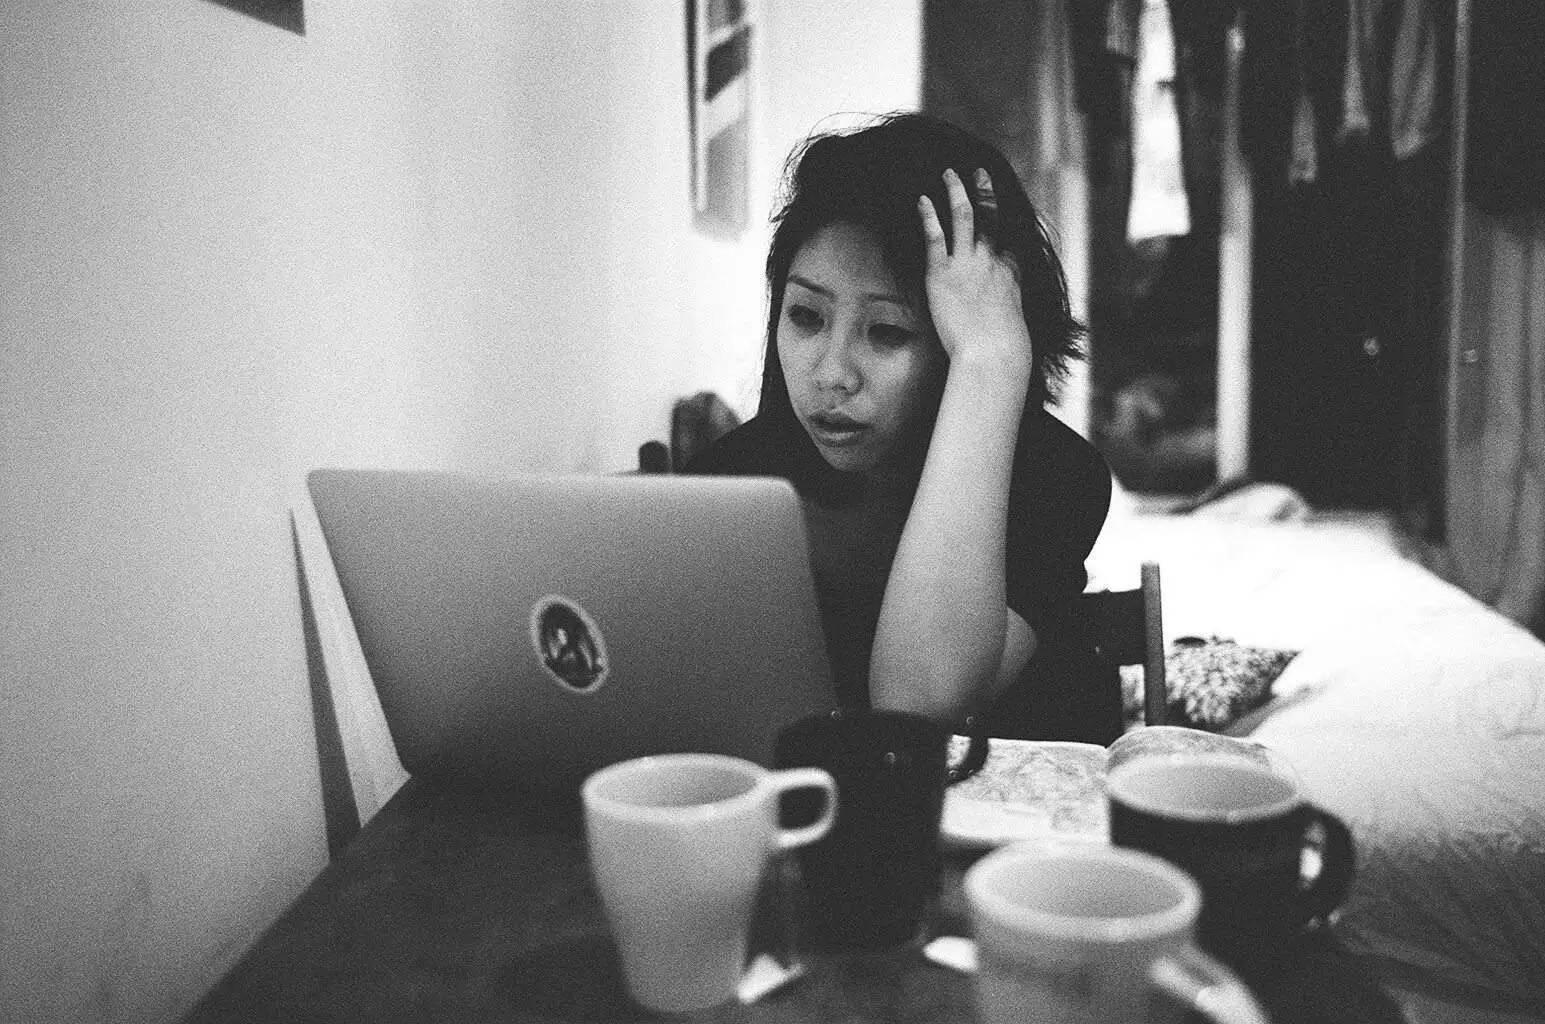 Focusing Woman With Coffee And Laptop Background